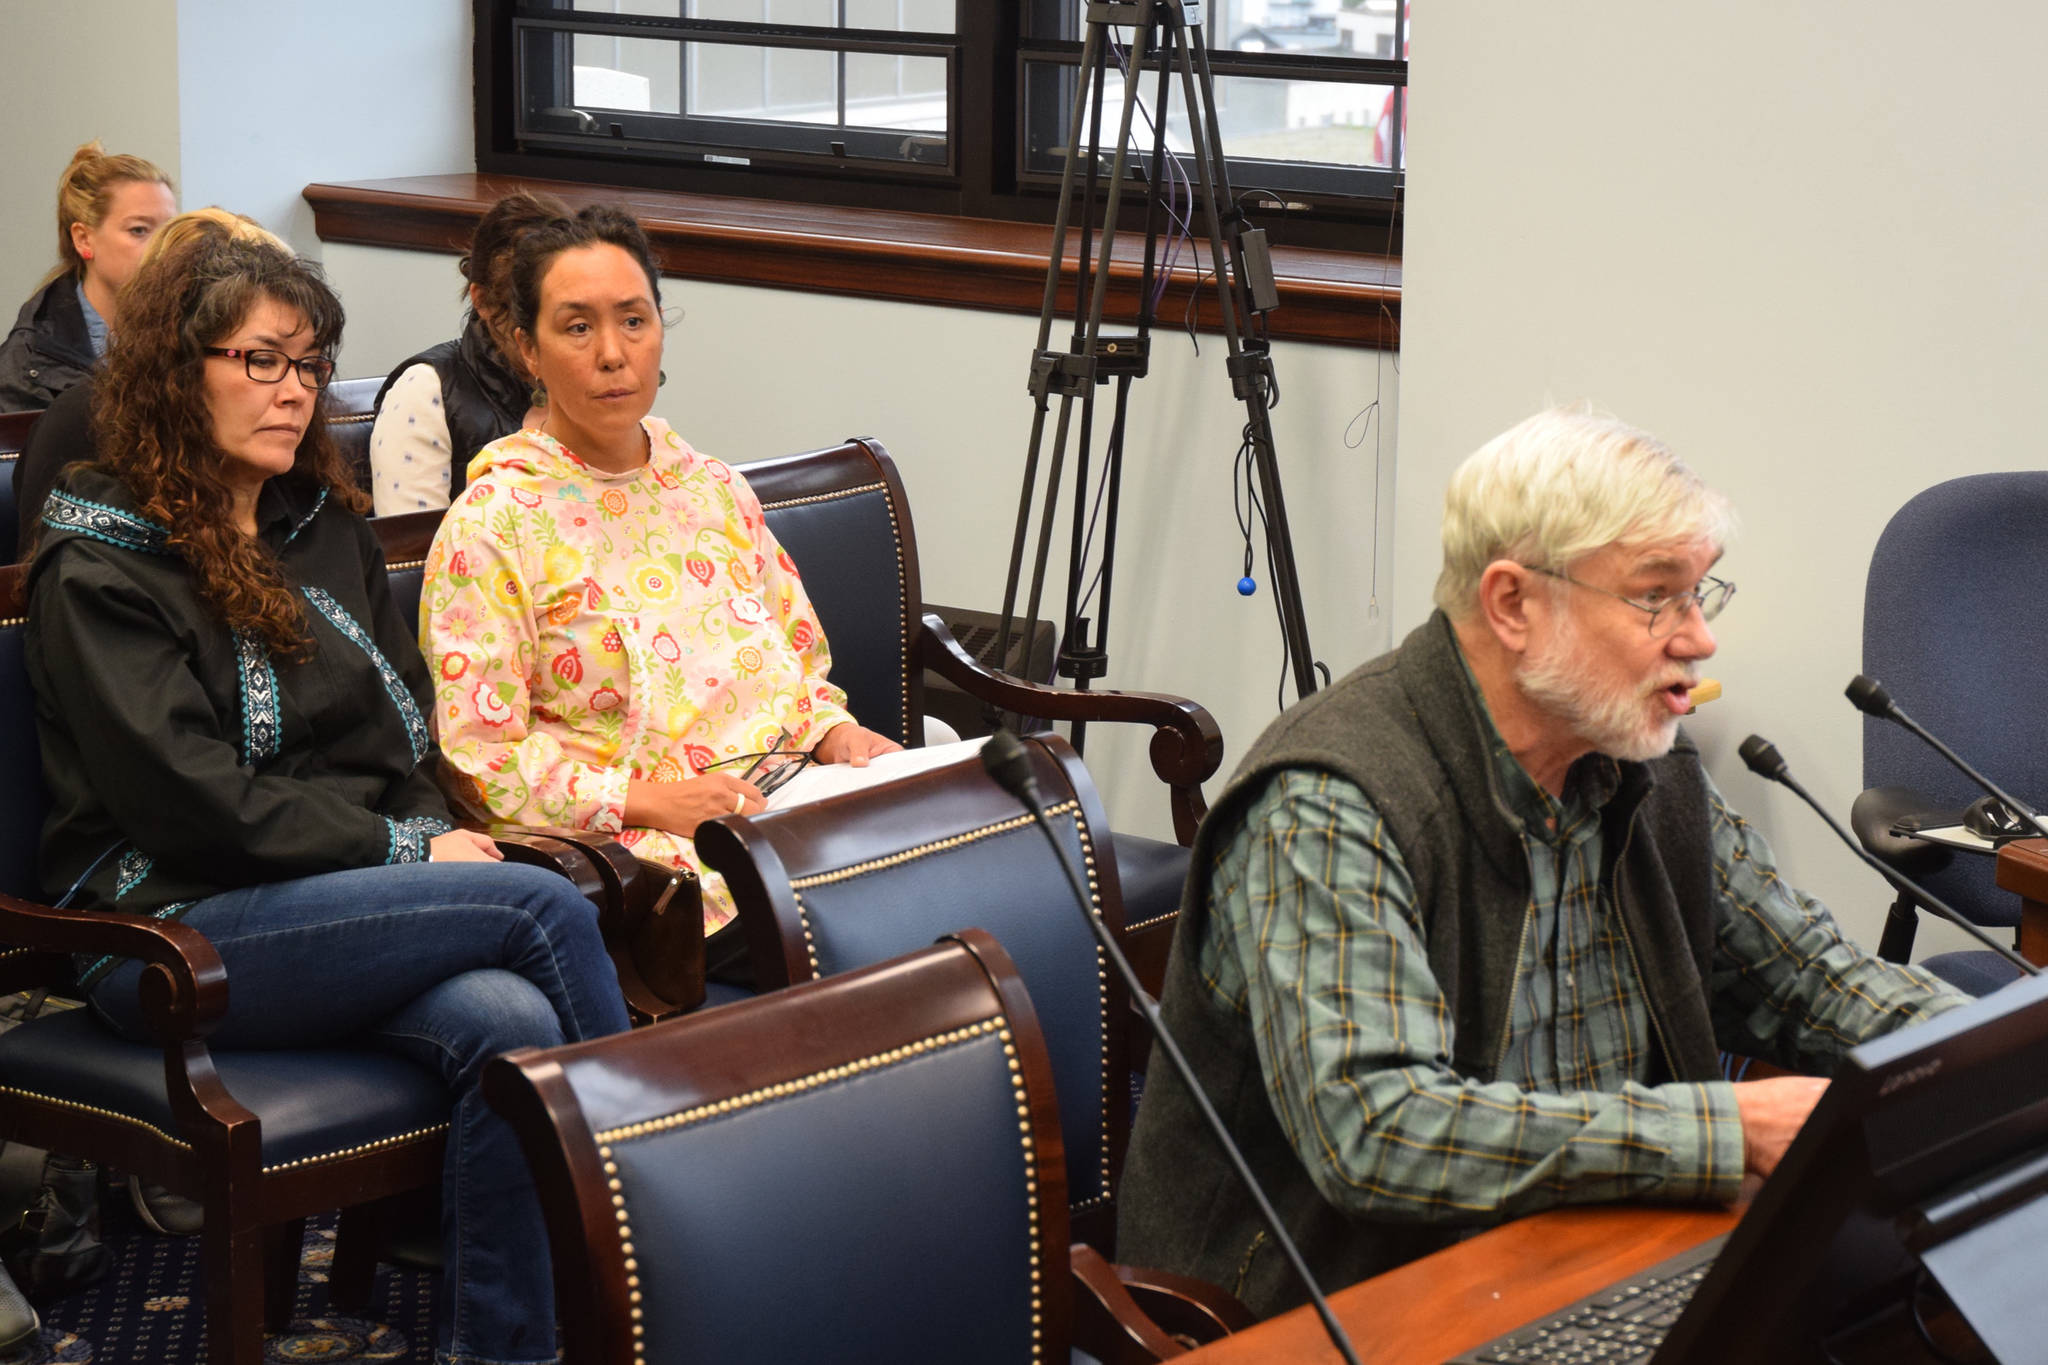 Bob King speaks in favor of Ballot Measure 1, which would change how permitting is regulated on salmon habitat in Alaska, during a public testimony session at the Alaska Capitol on Friday, Sept. 7, 2018. (Kevin Gullufsen | Juneau Empire)